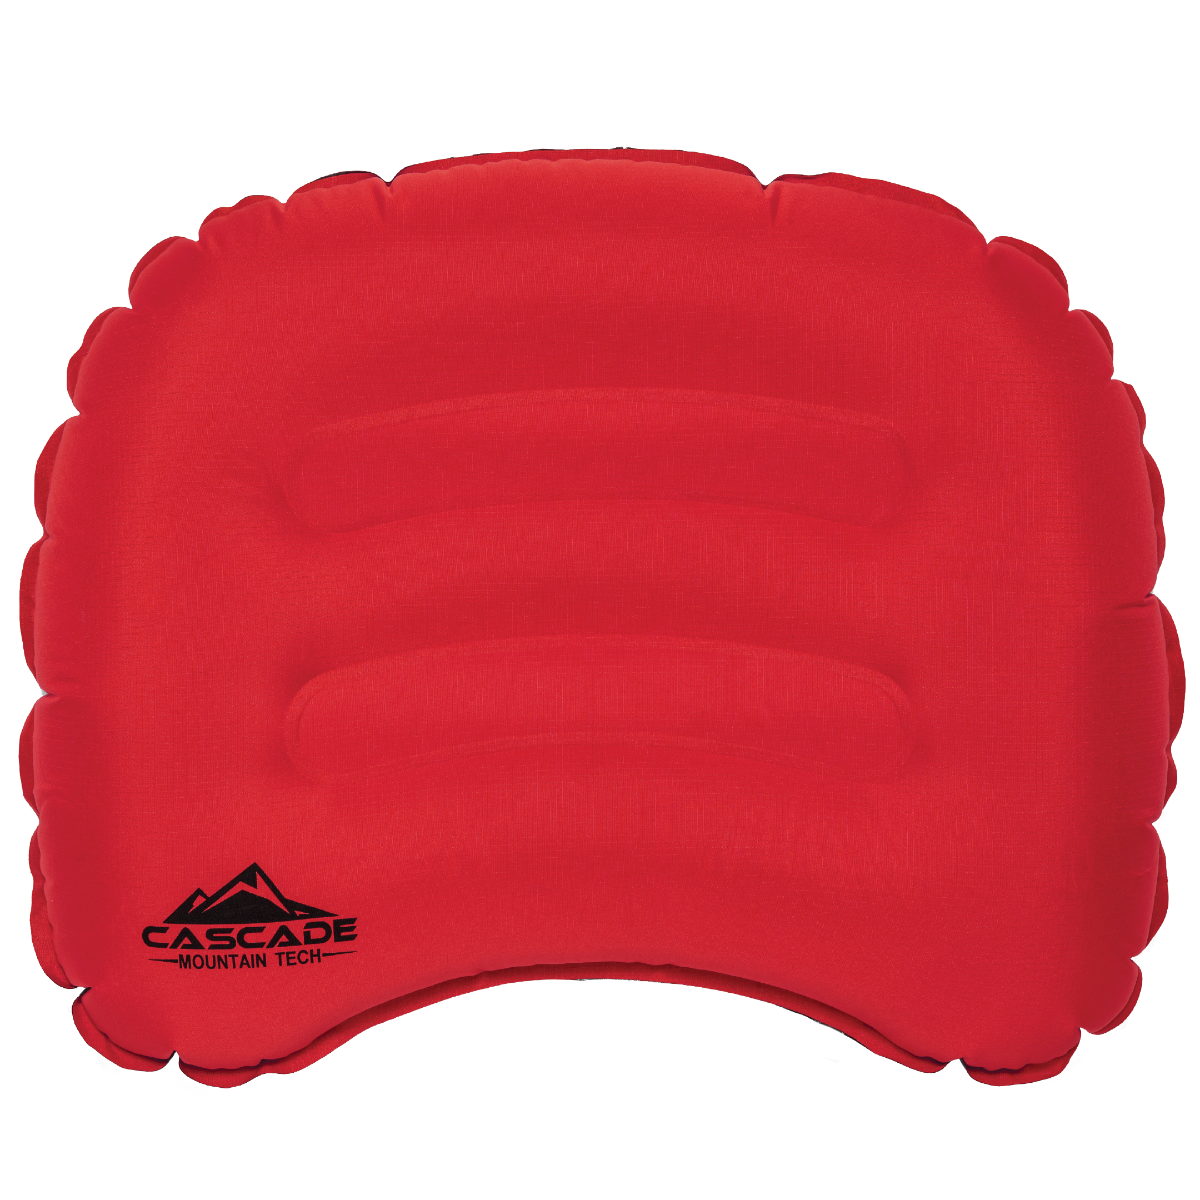 ALMOHADA DE CAMPING INFLABLE WIDESEA – Mountain House Patagonia